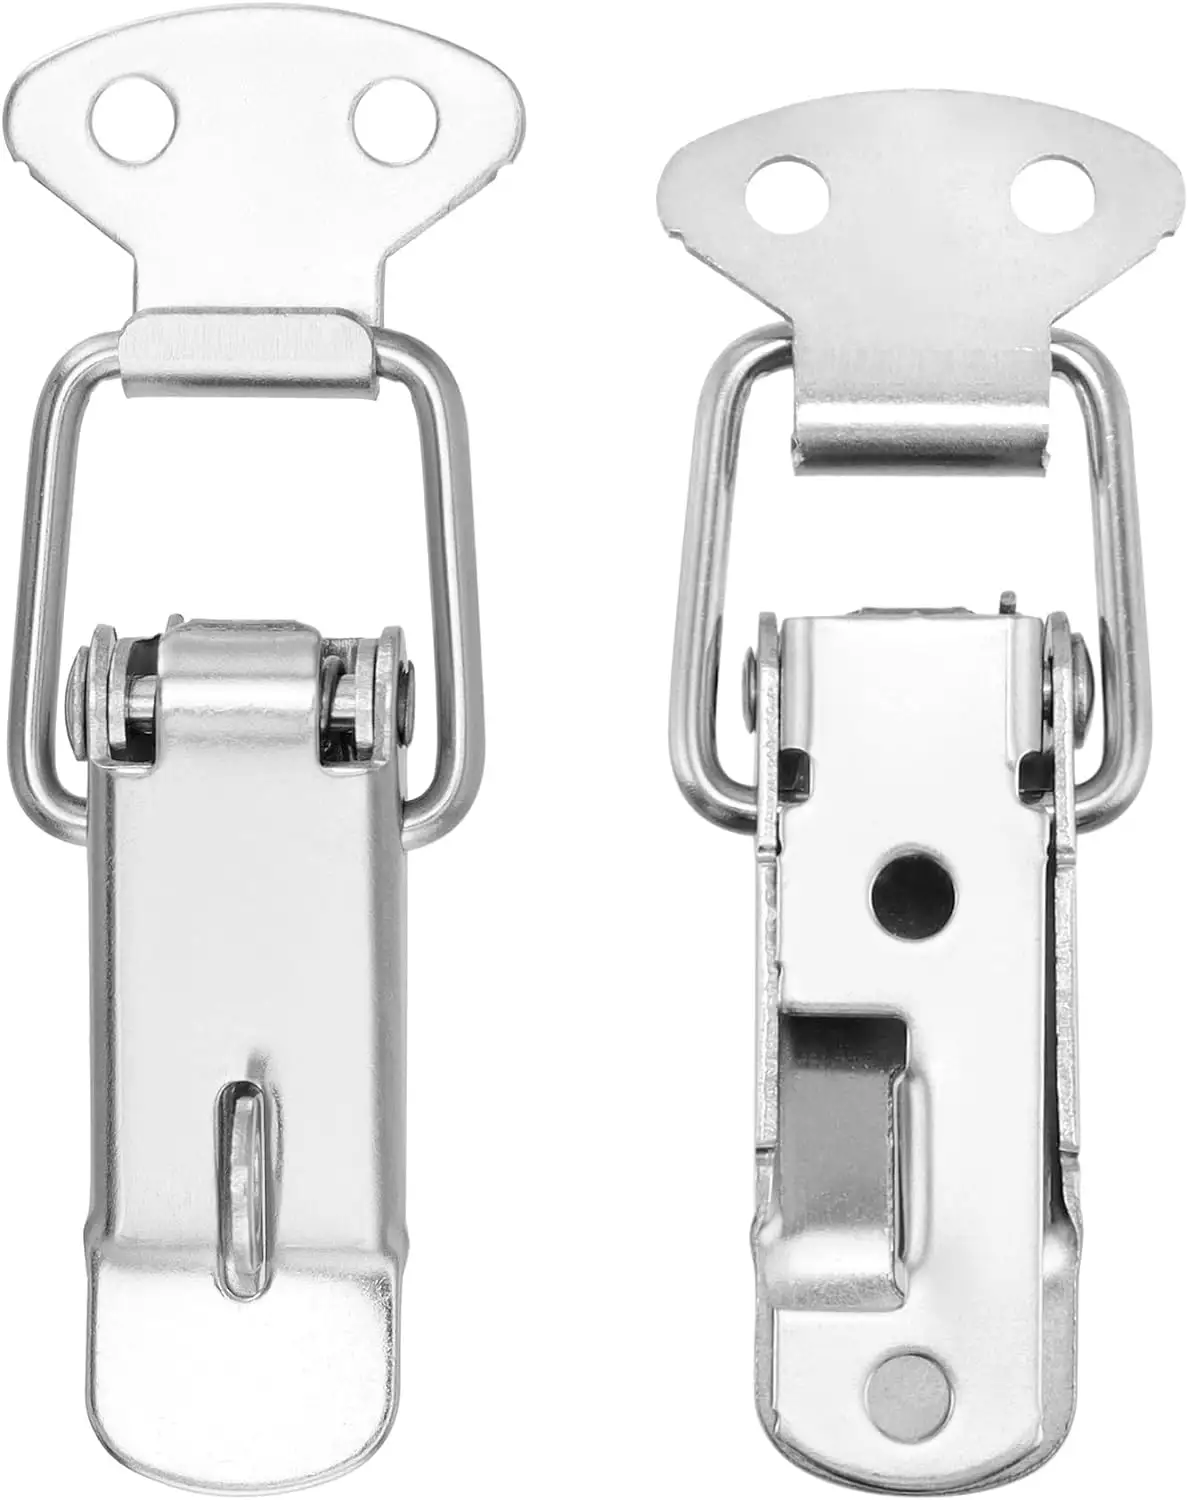 116mm Length Stainless Steel 304 Nickel Plated Toggle Latch Spring Loaded Box Clamp Latch